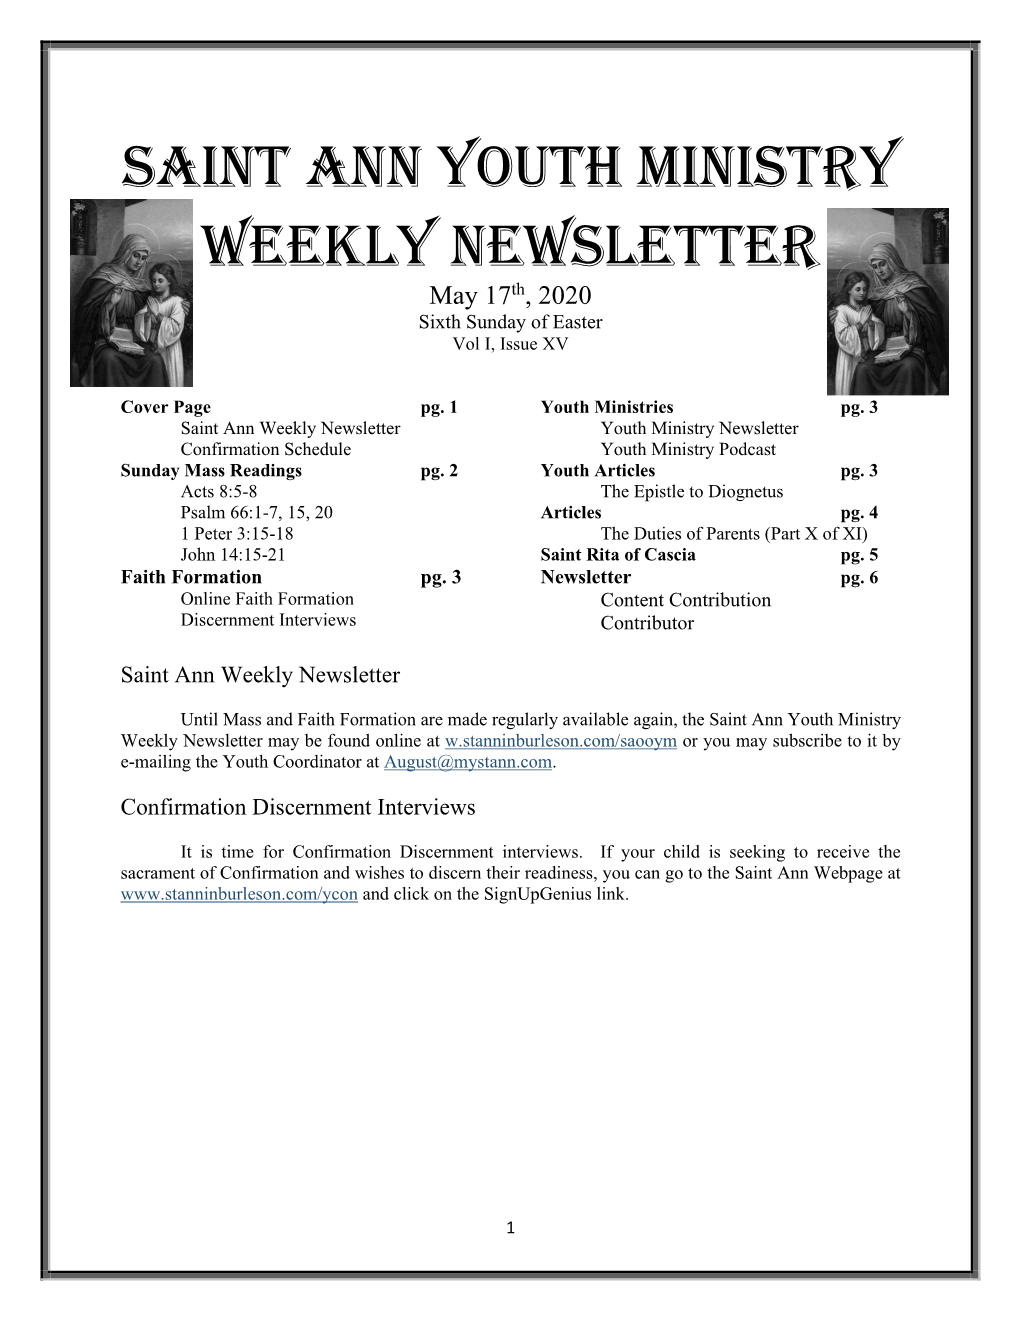 Saint Ann Youth Ministry Weekly Newsletter May 17Th, 2020 Sixth Sunday of Easter Vol I, Issue XV